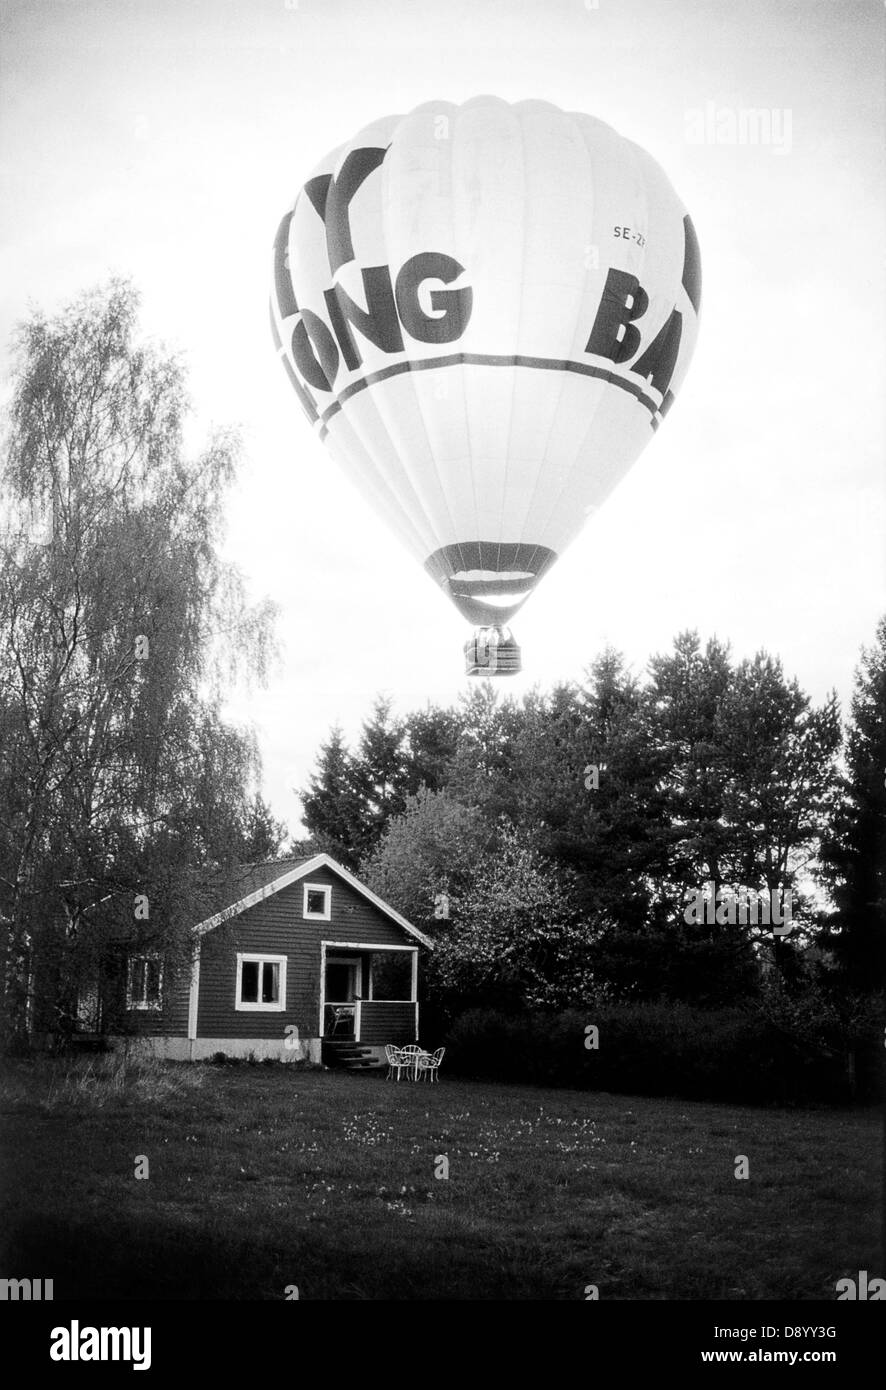 An air balloon above a cottage, Sweden. Stock Photo